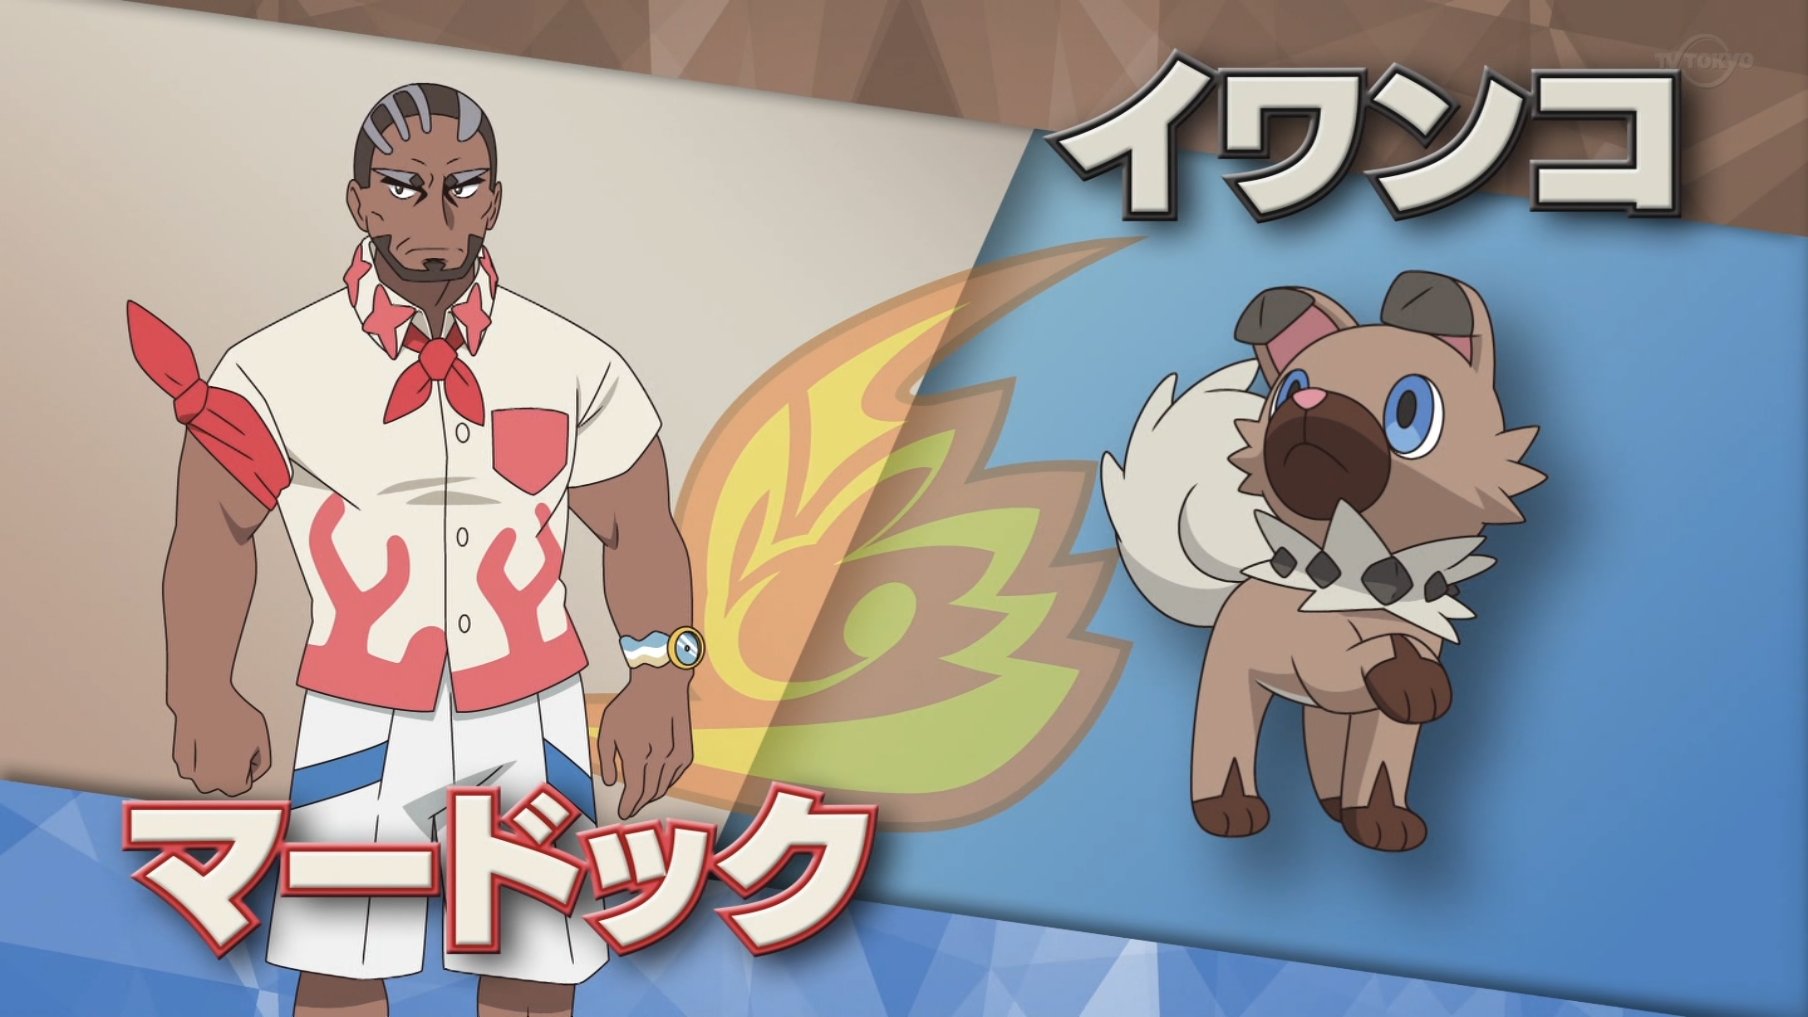 Serebii.net - CoroCoro has leaked and has revealed a new Pokémon and two Ultra  Beasts. These Pokémon are Rockruff's evolutions that differ in form between  day & night. What are your thoughts?